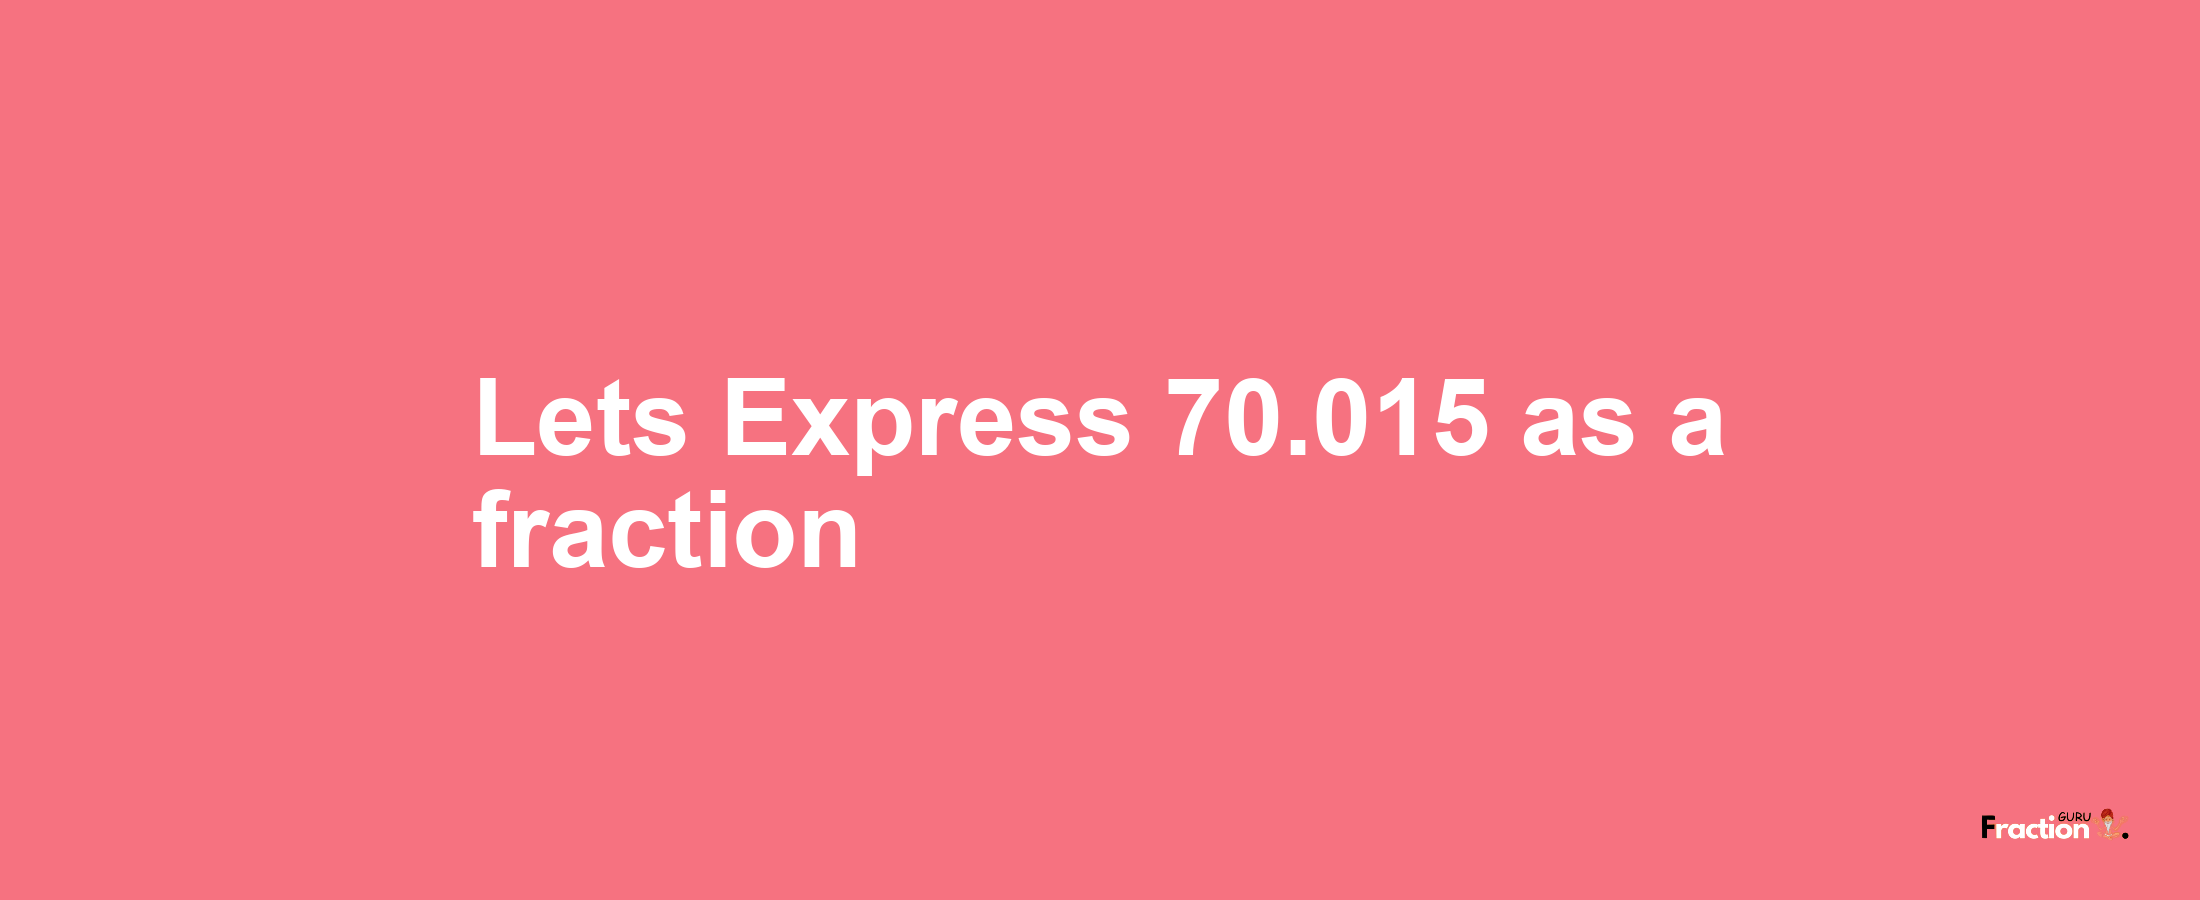 Lets Express 70.015 as afraction